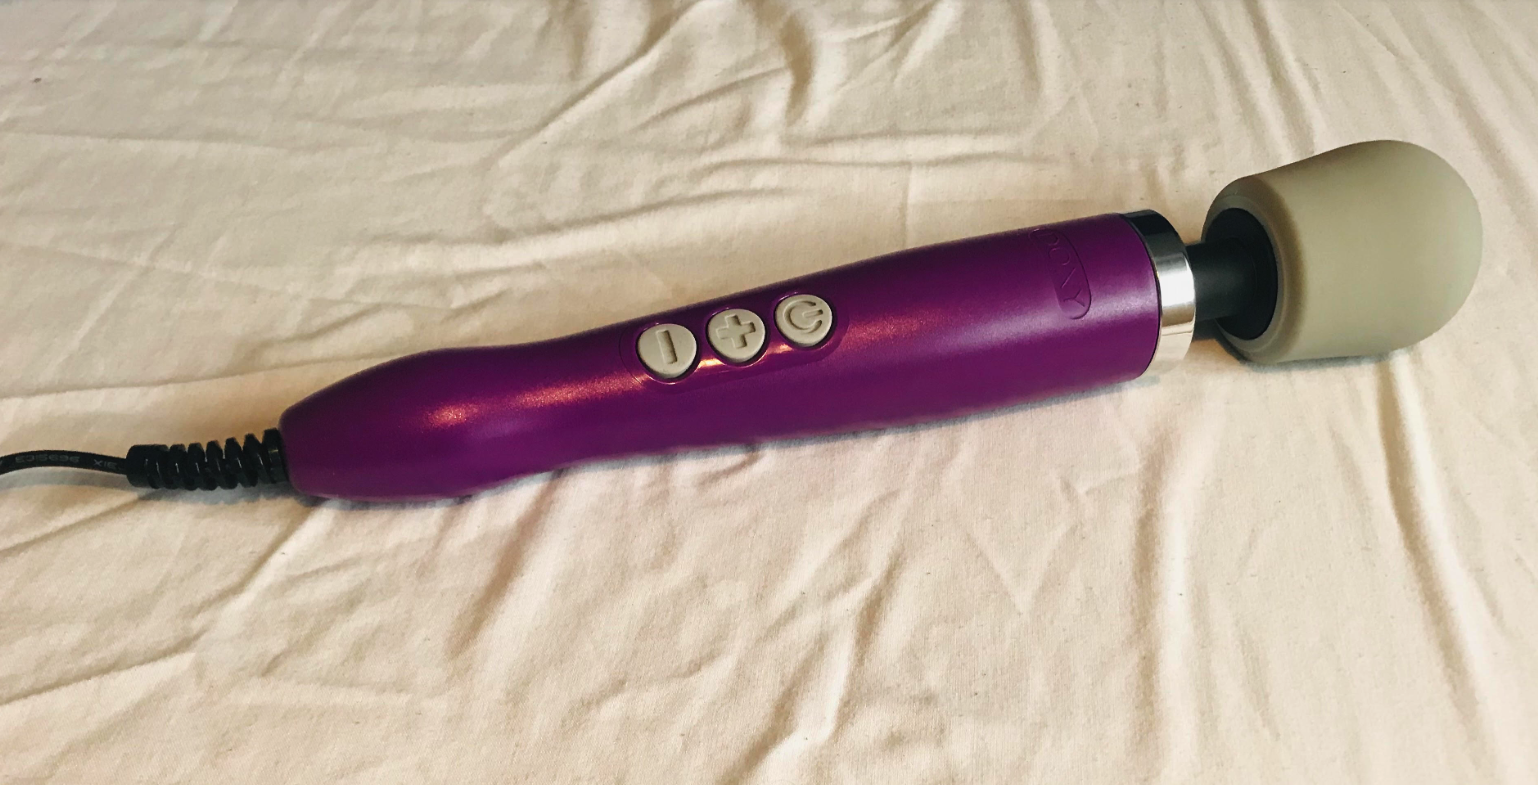 Image of a purple Doxy wand with grey head against white sheets in background